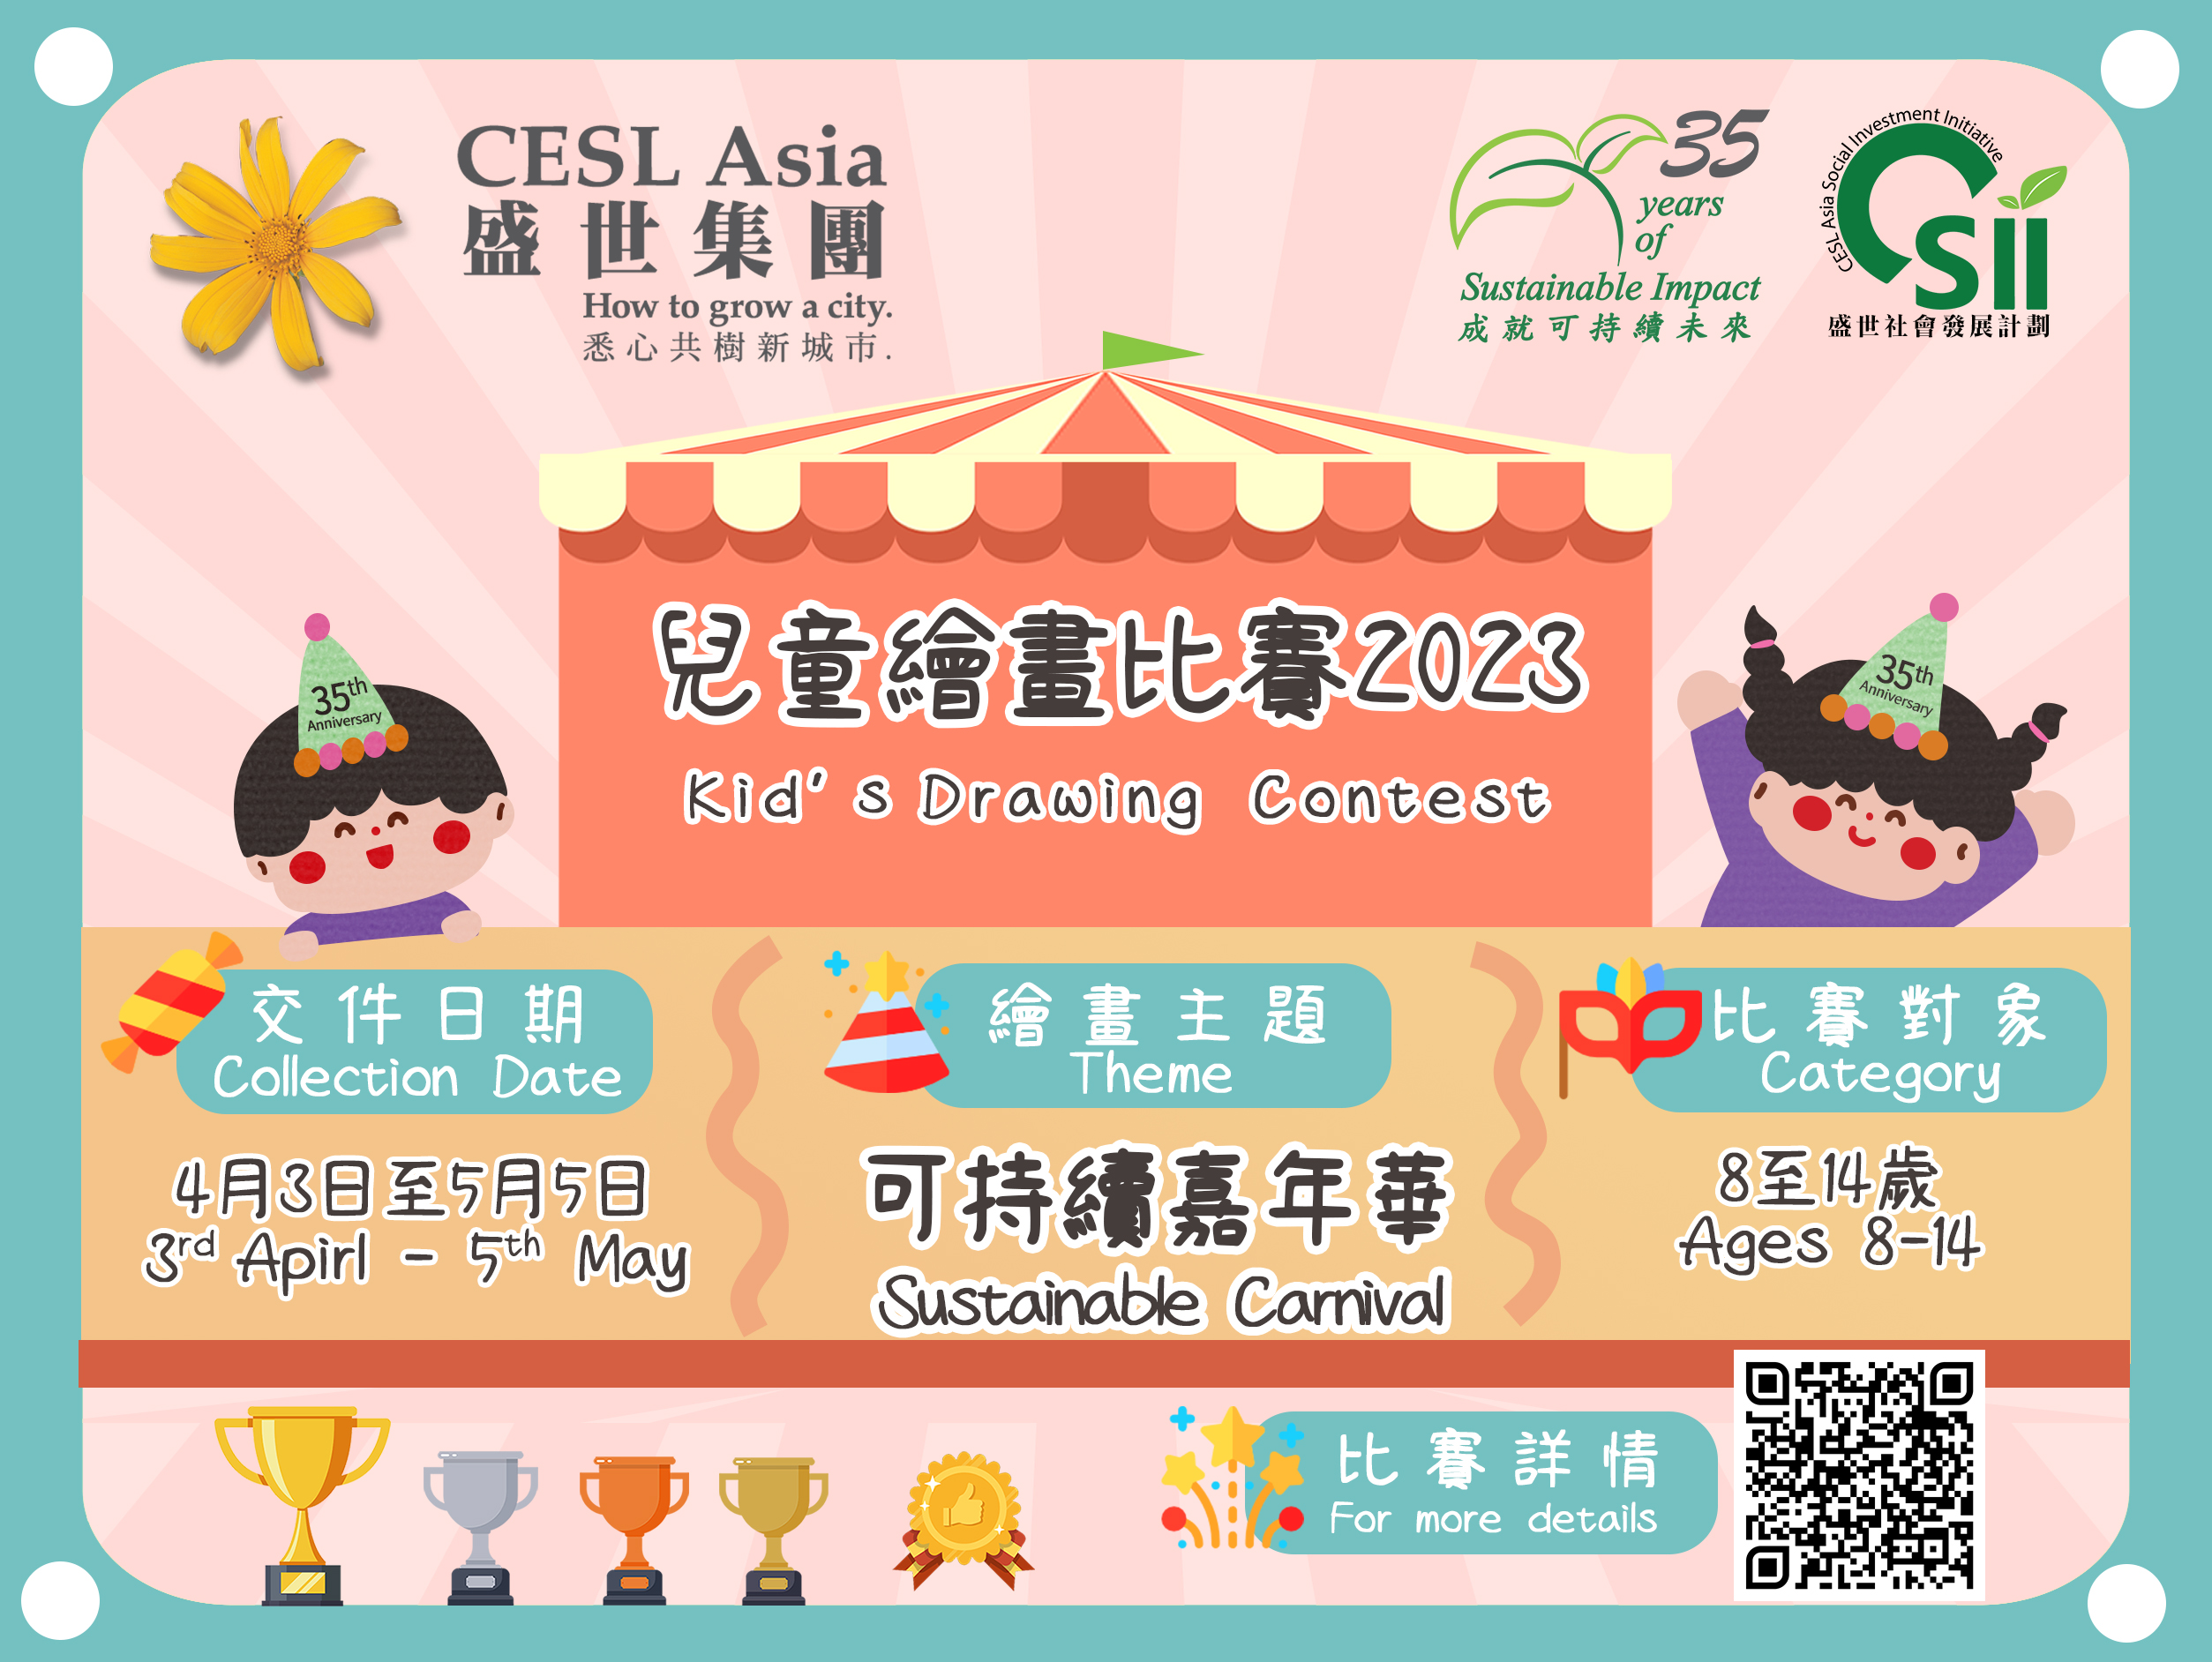 CESL Asia's “Sustainable Carnival Kid's Drawing Contest” Lets Imagination Run Wild